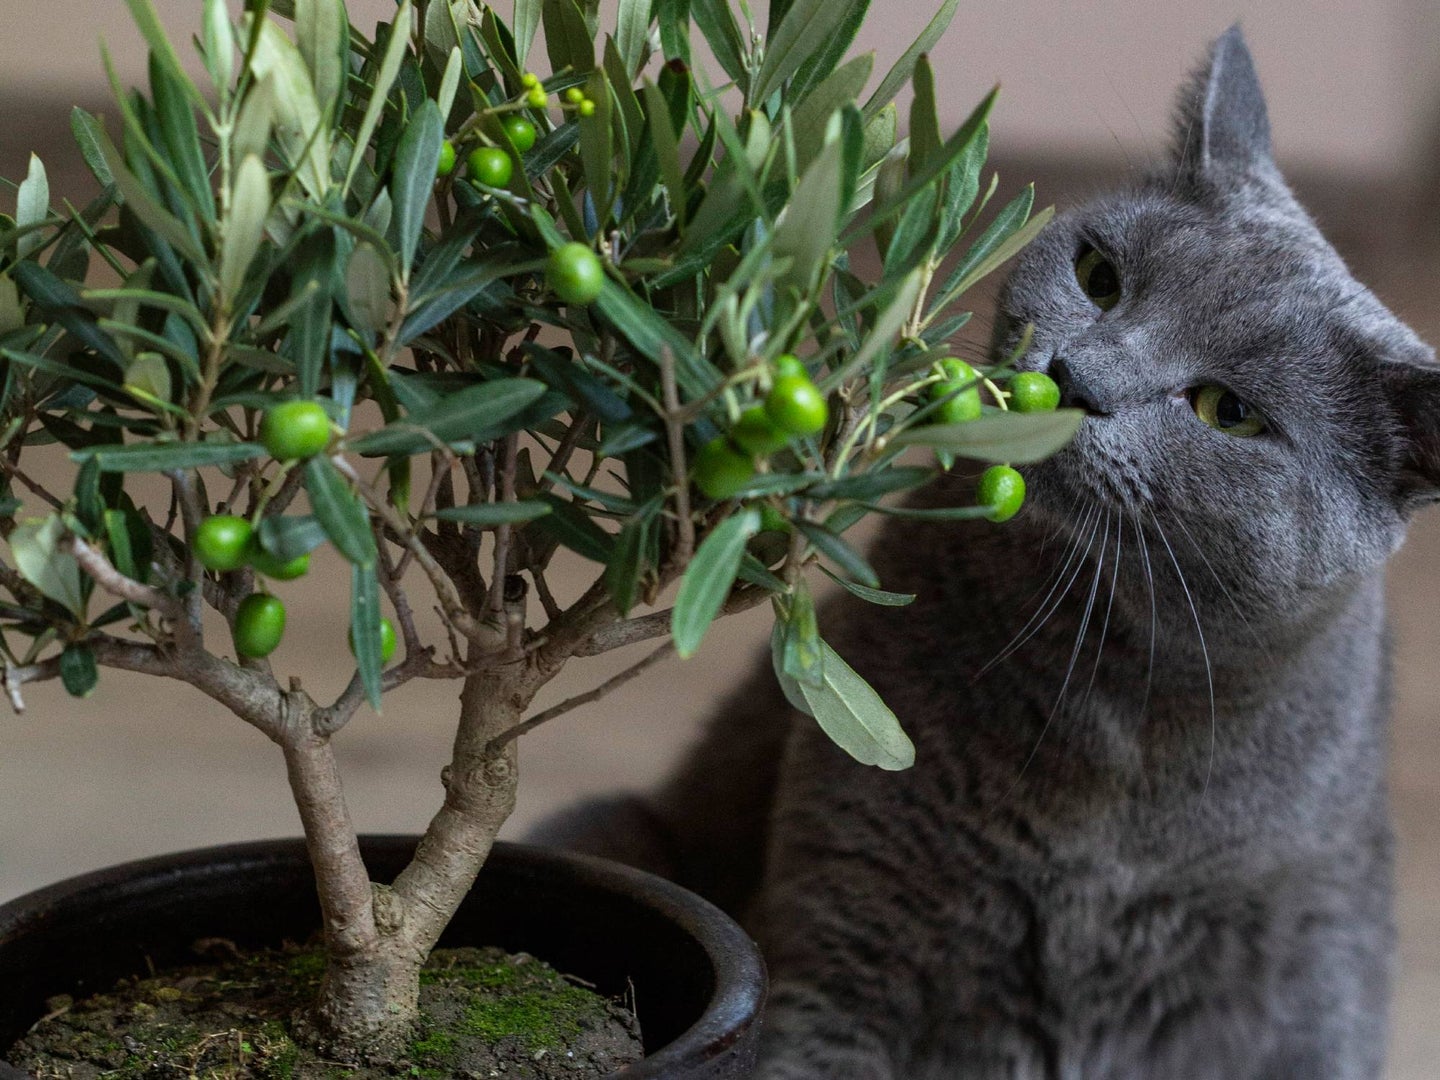 Houseplants That Are Toxic To Cats